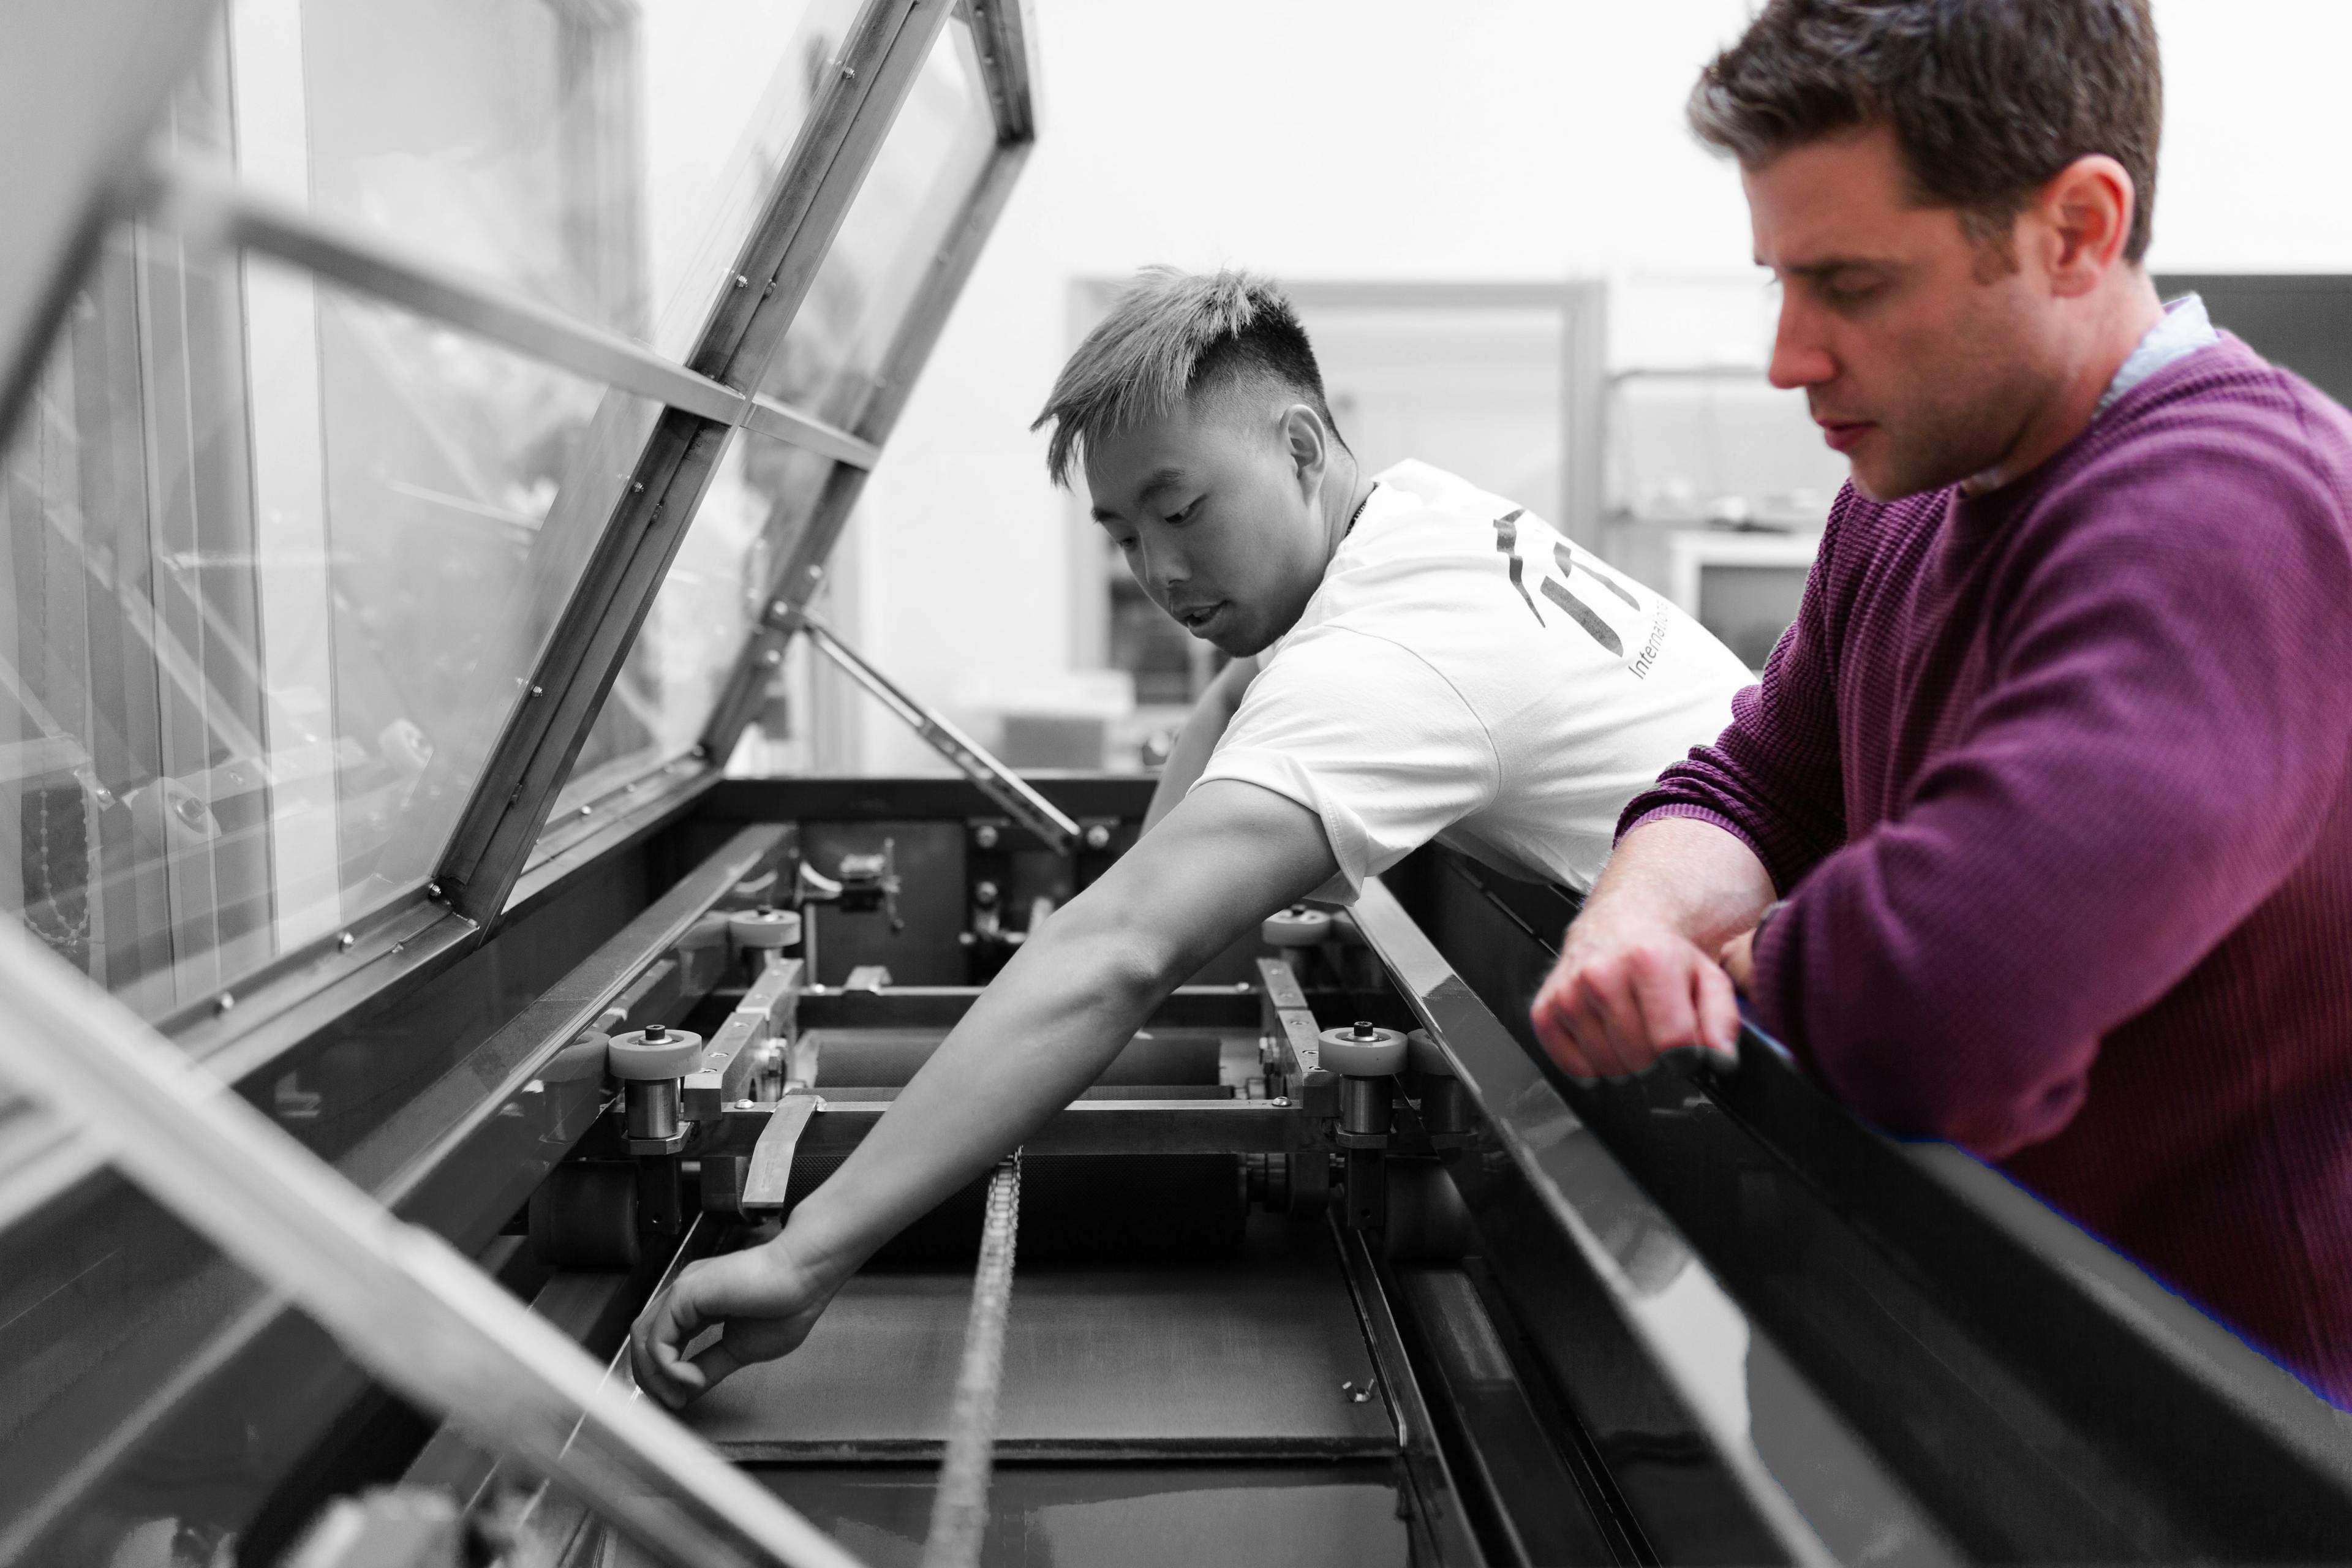 A worker or student inspects a large format printer with a manager or colleague next to him